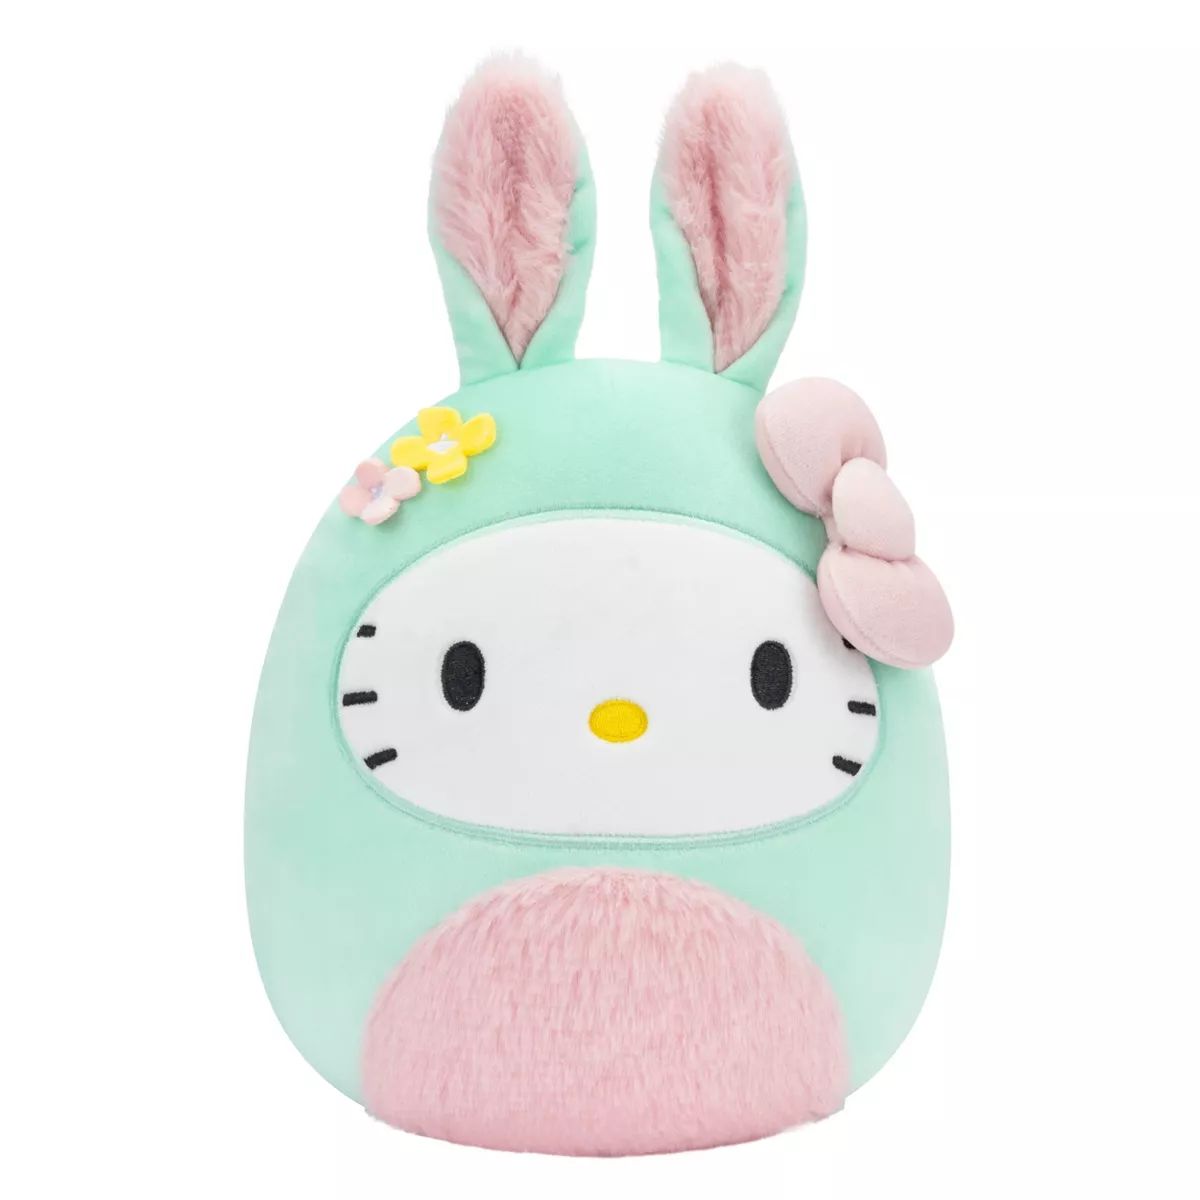 Squishmallows 8" Sanrio Easter Hello Kitty in Bunny Suit Little Plush | Target